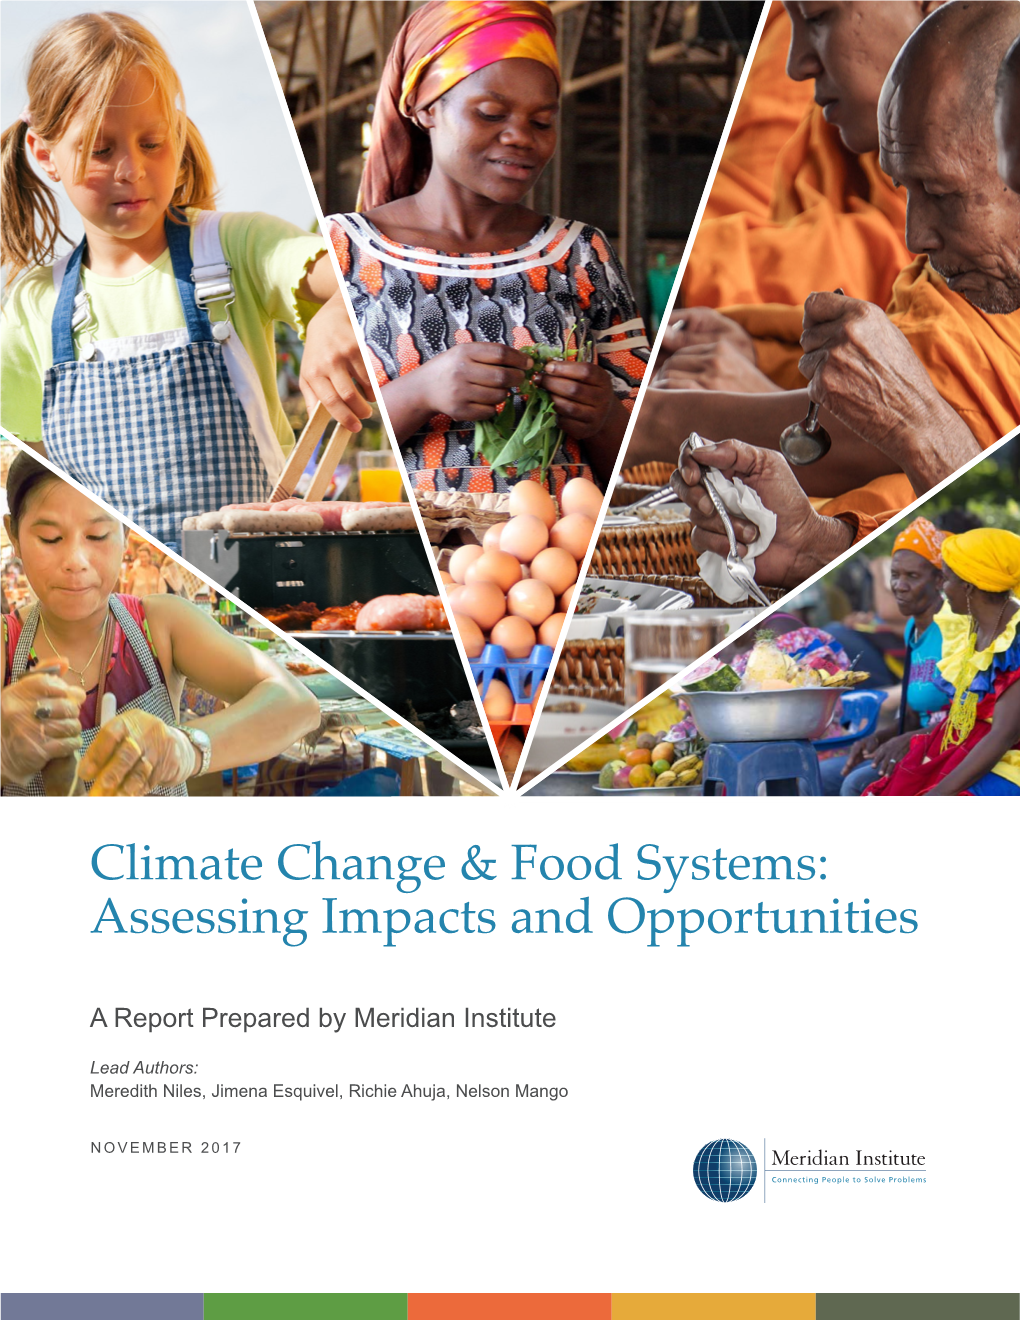 Climate Change & Food Systems: Assessing Impacts and Opportunities